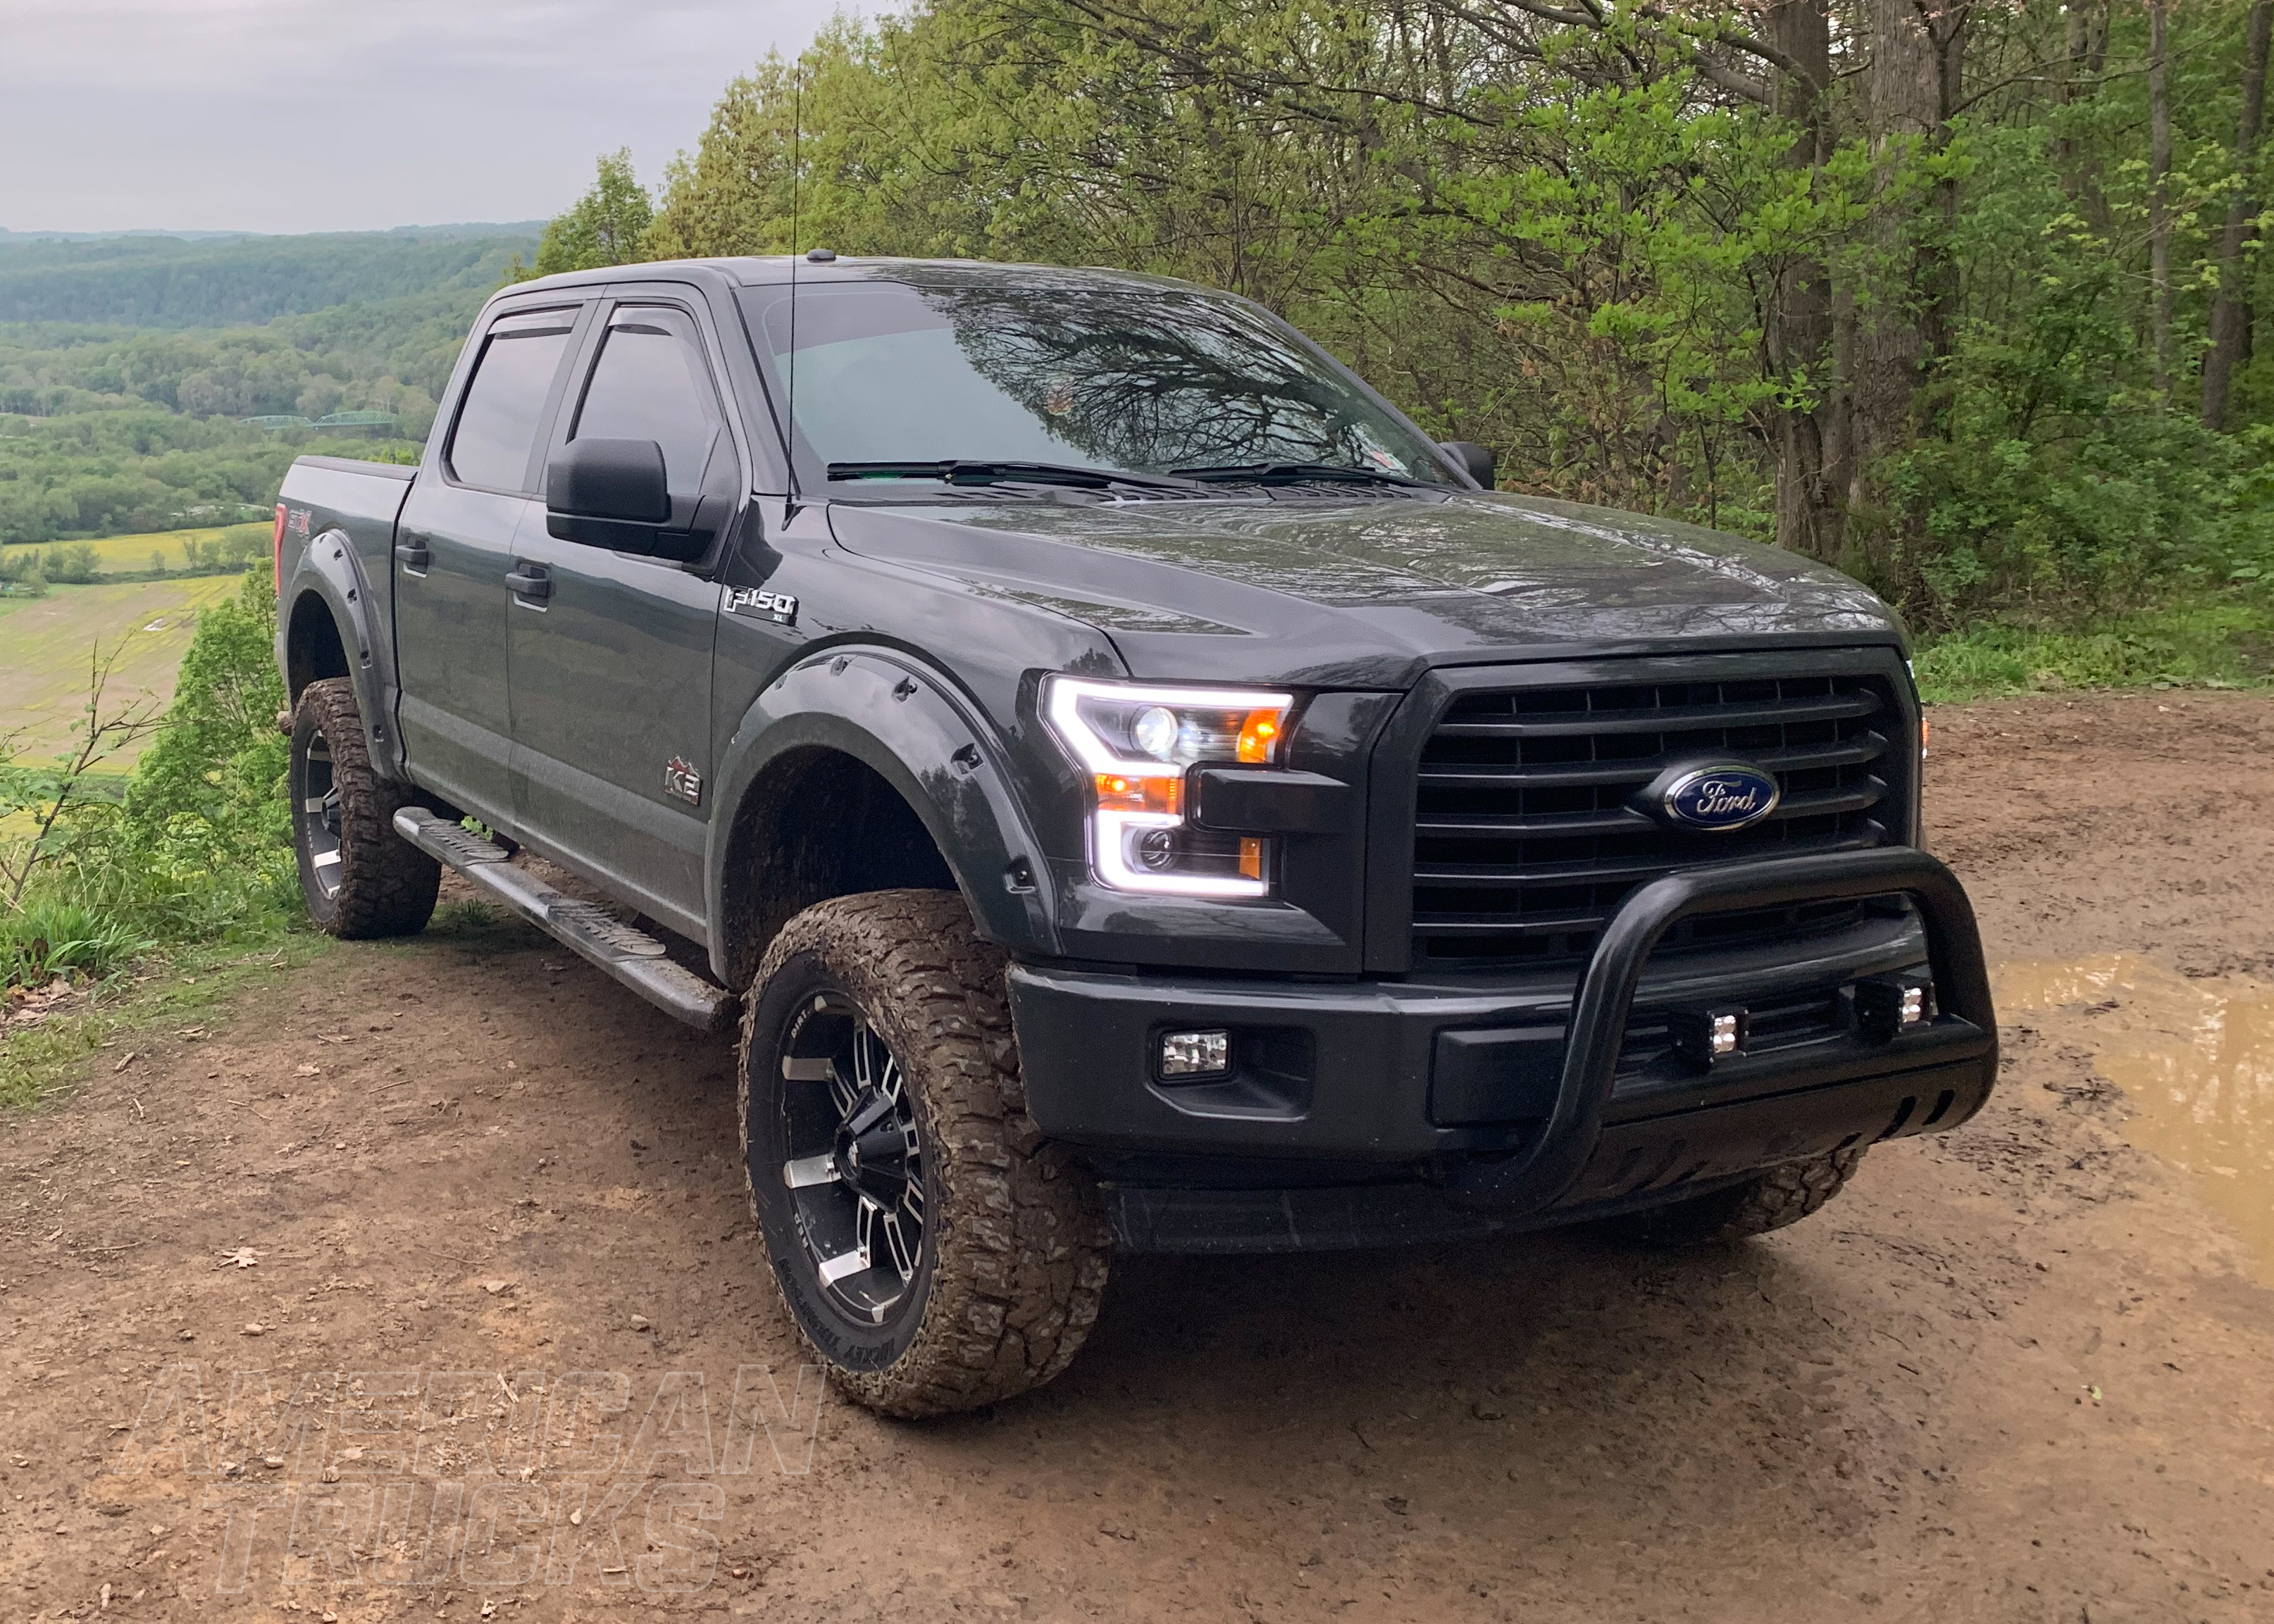 2017 Lifted F150 on Mickey Thompson Tires